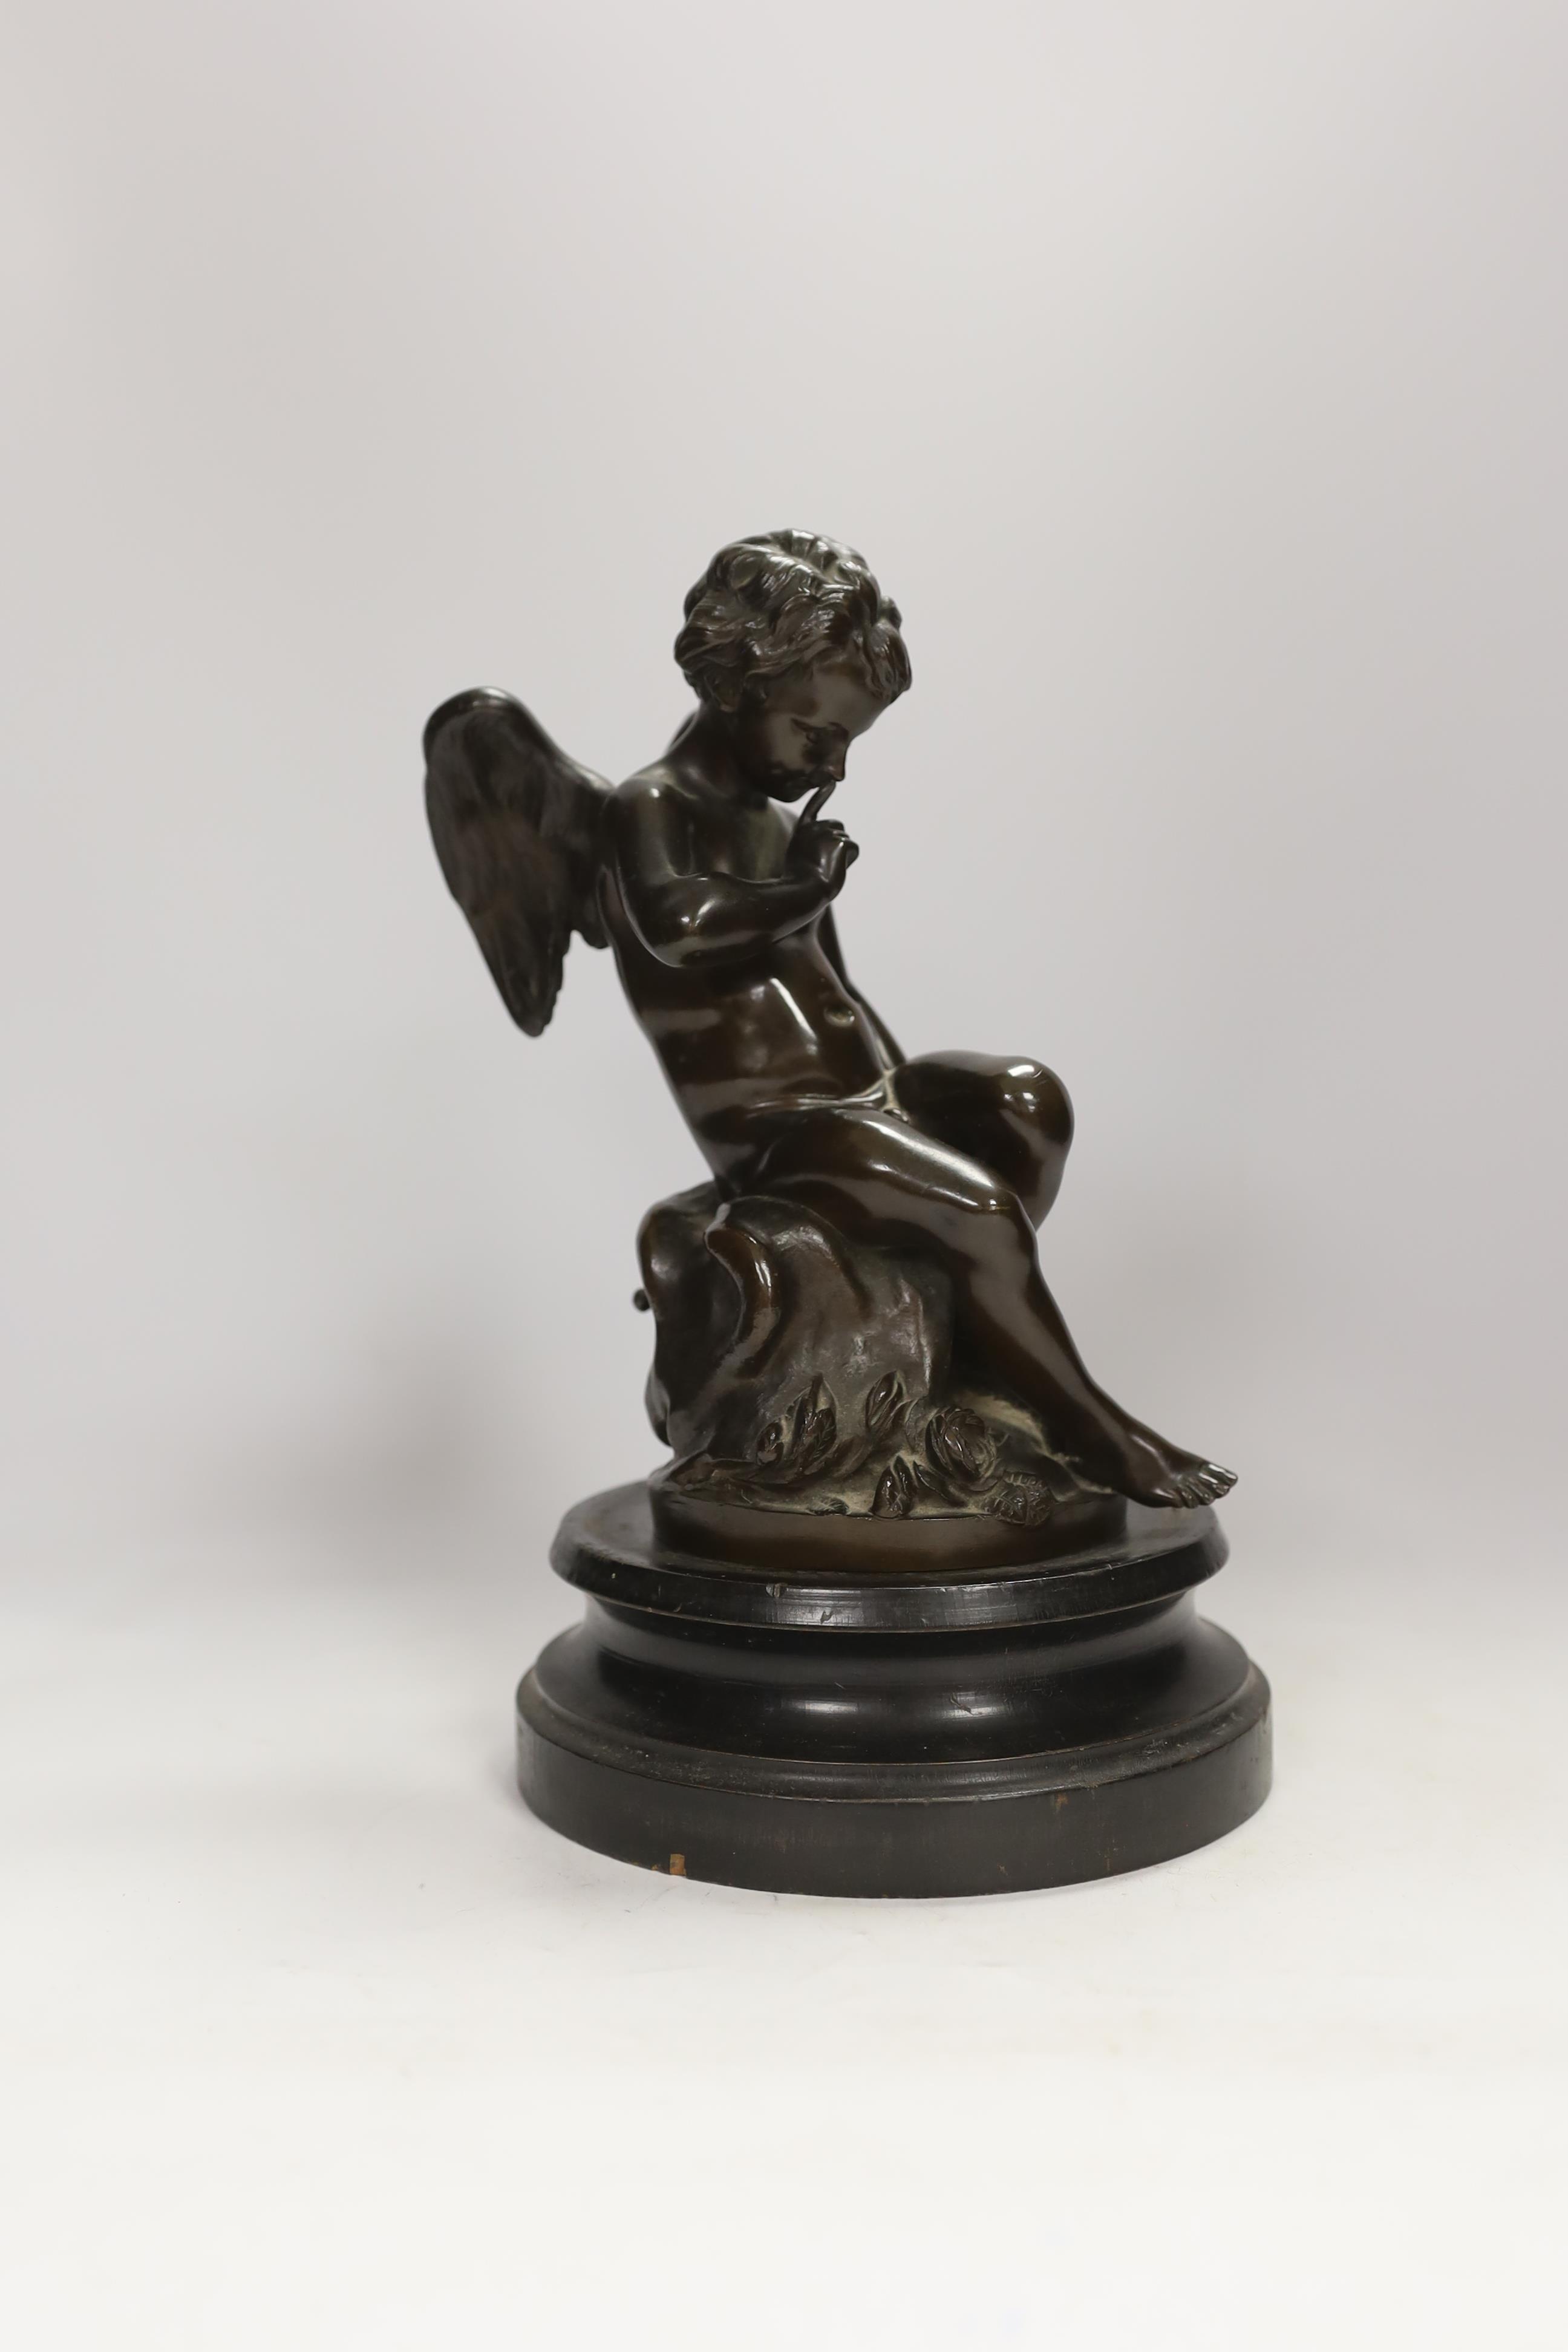 After Etienne Maurice Falconet (French, 1716-1791), a cast bronze of Cupid ‘L’Amour Menacant, on hardwood stand, 28cm total